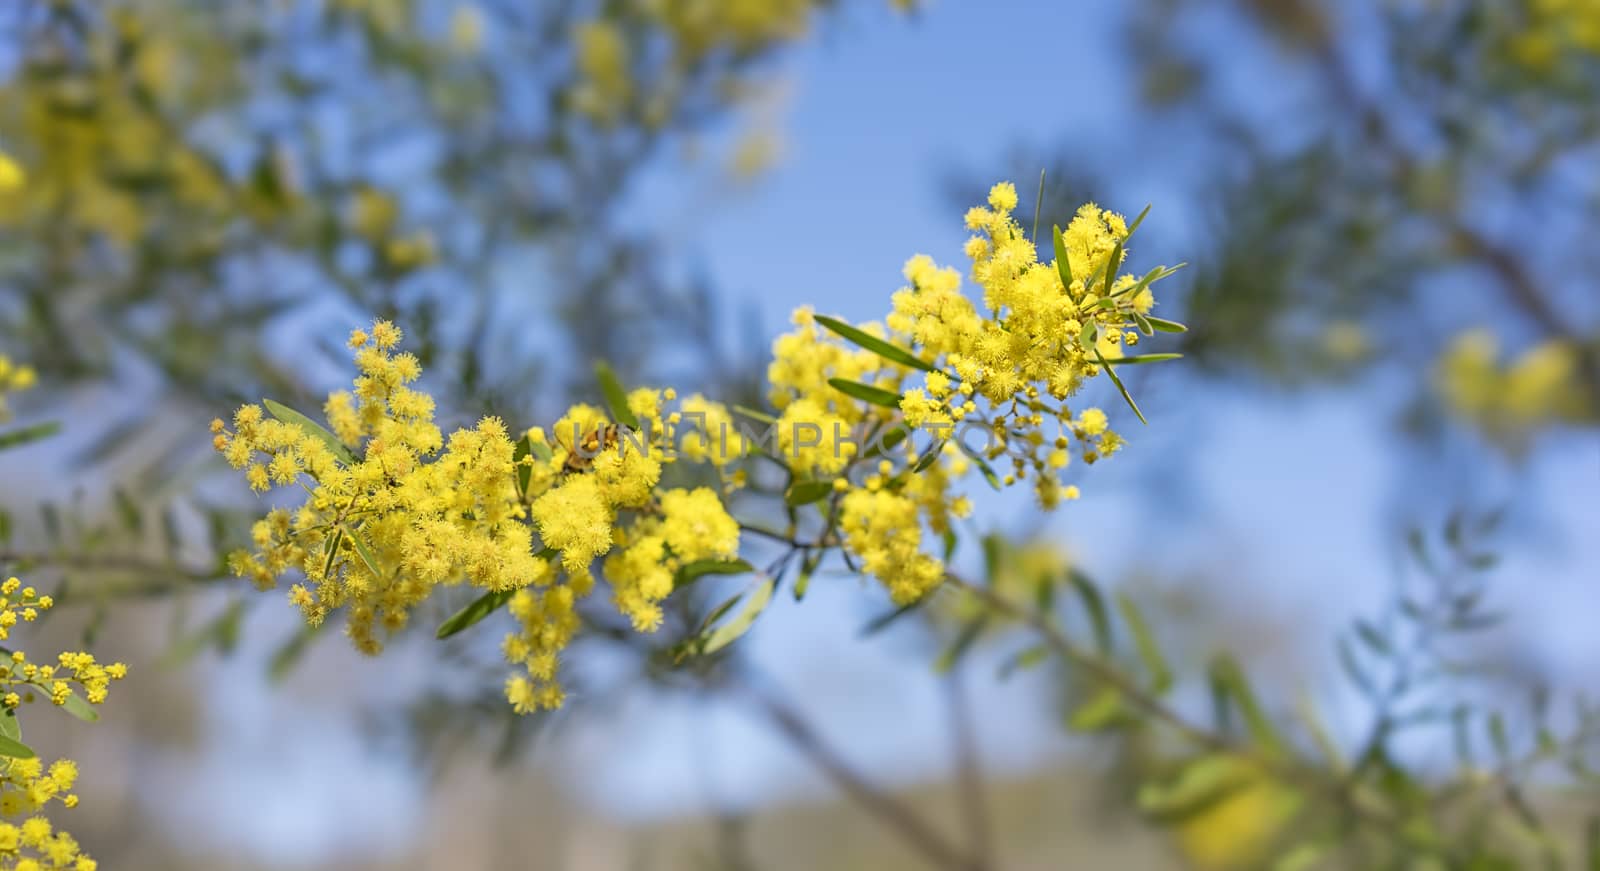 Australia Winter and spring bright yellow wildflowers Acacia fimbriata commonly known as the Fringed Wattle or Brisbane Golden Wattle 